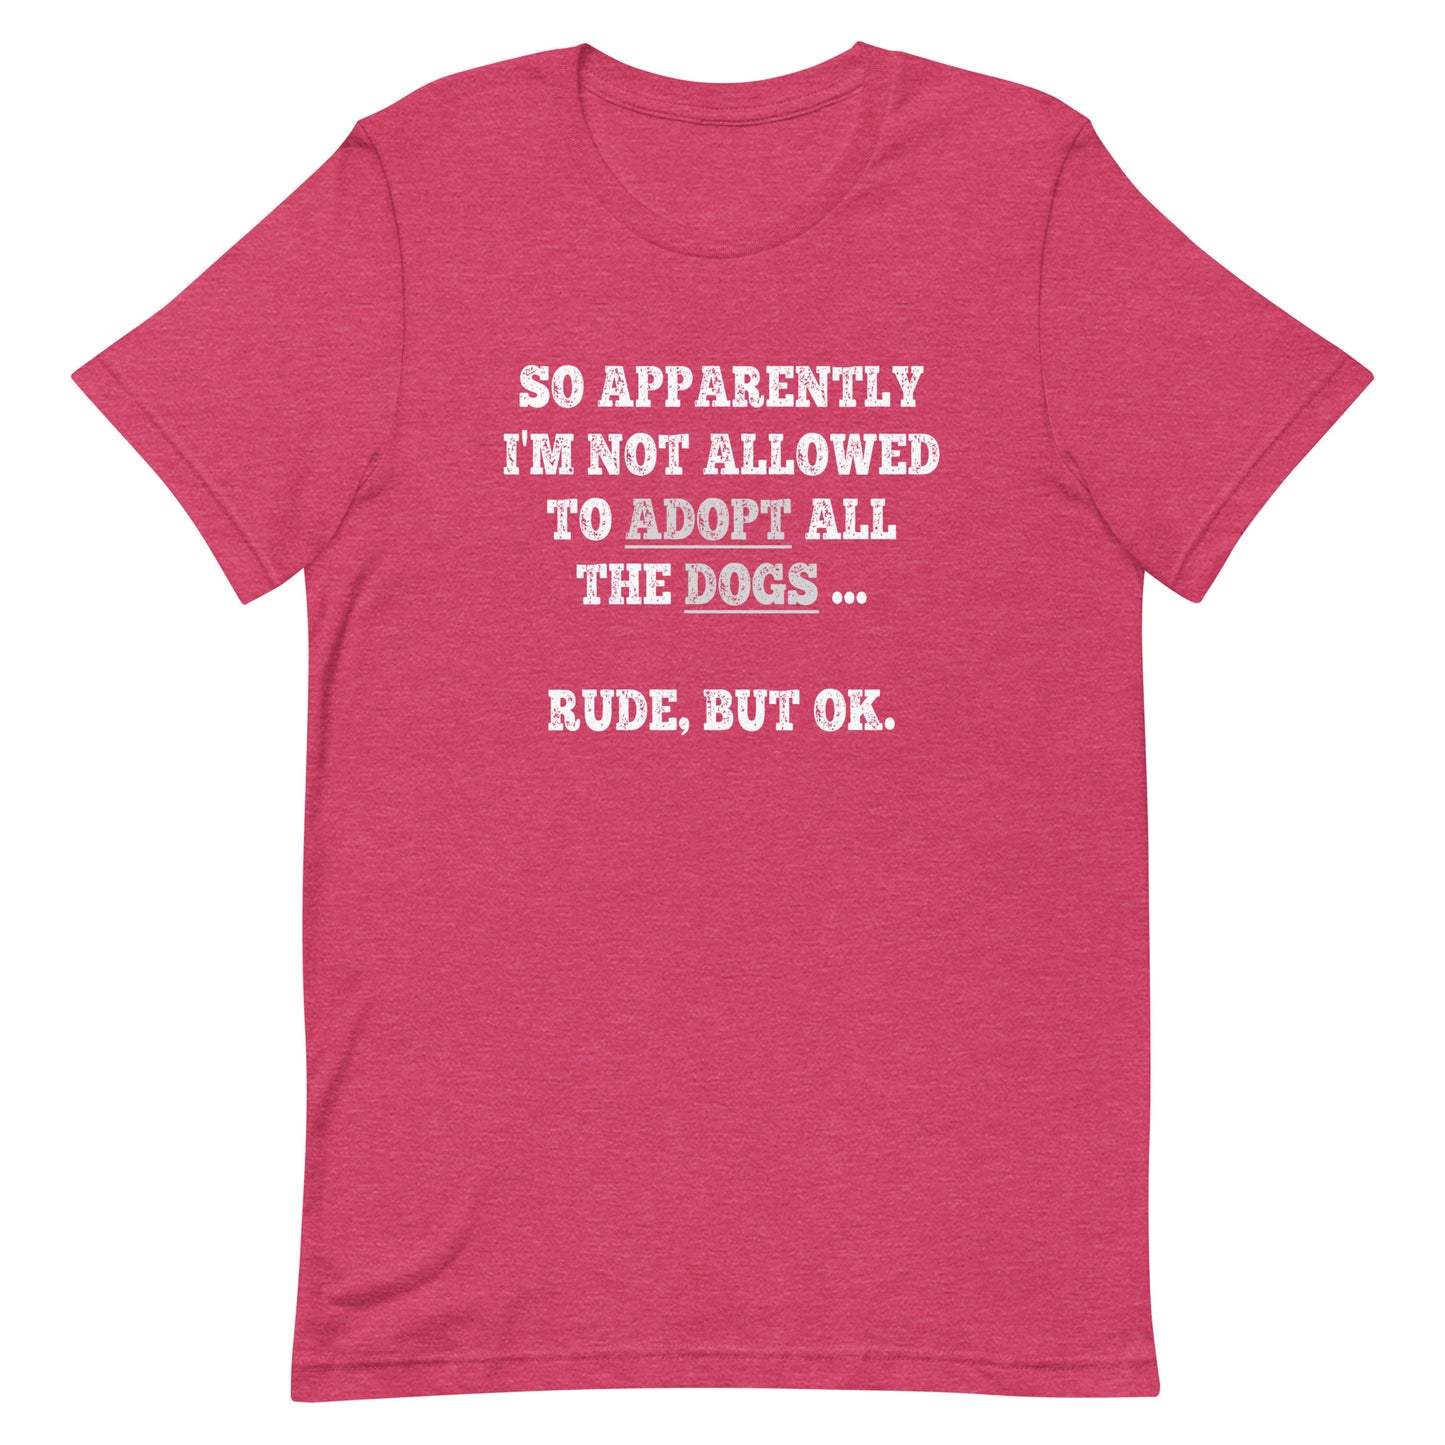 So Apparently I'm Not Allowed To Adopt All The Dogs ... Rude, But OK. T-Shirt